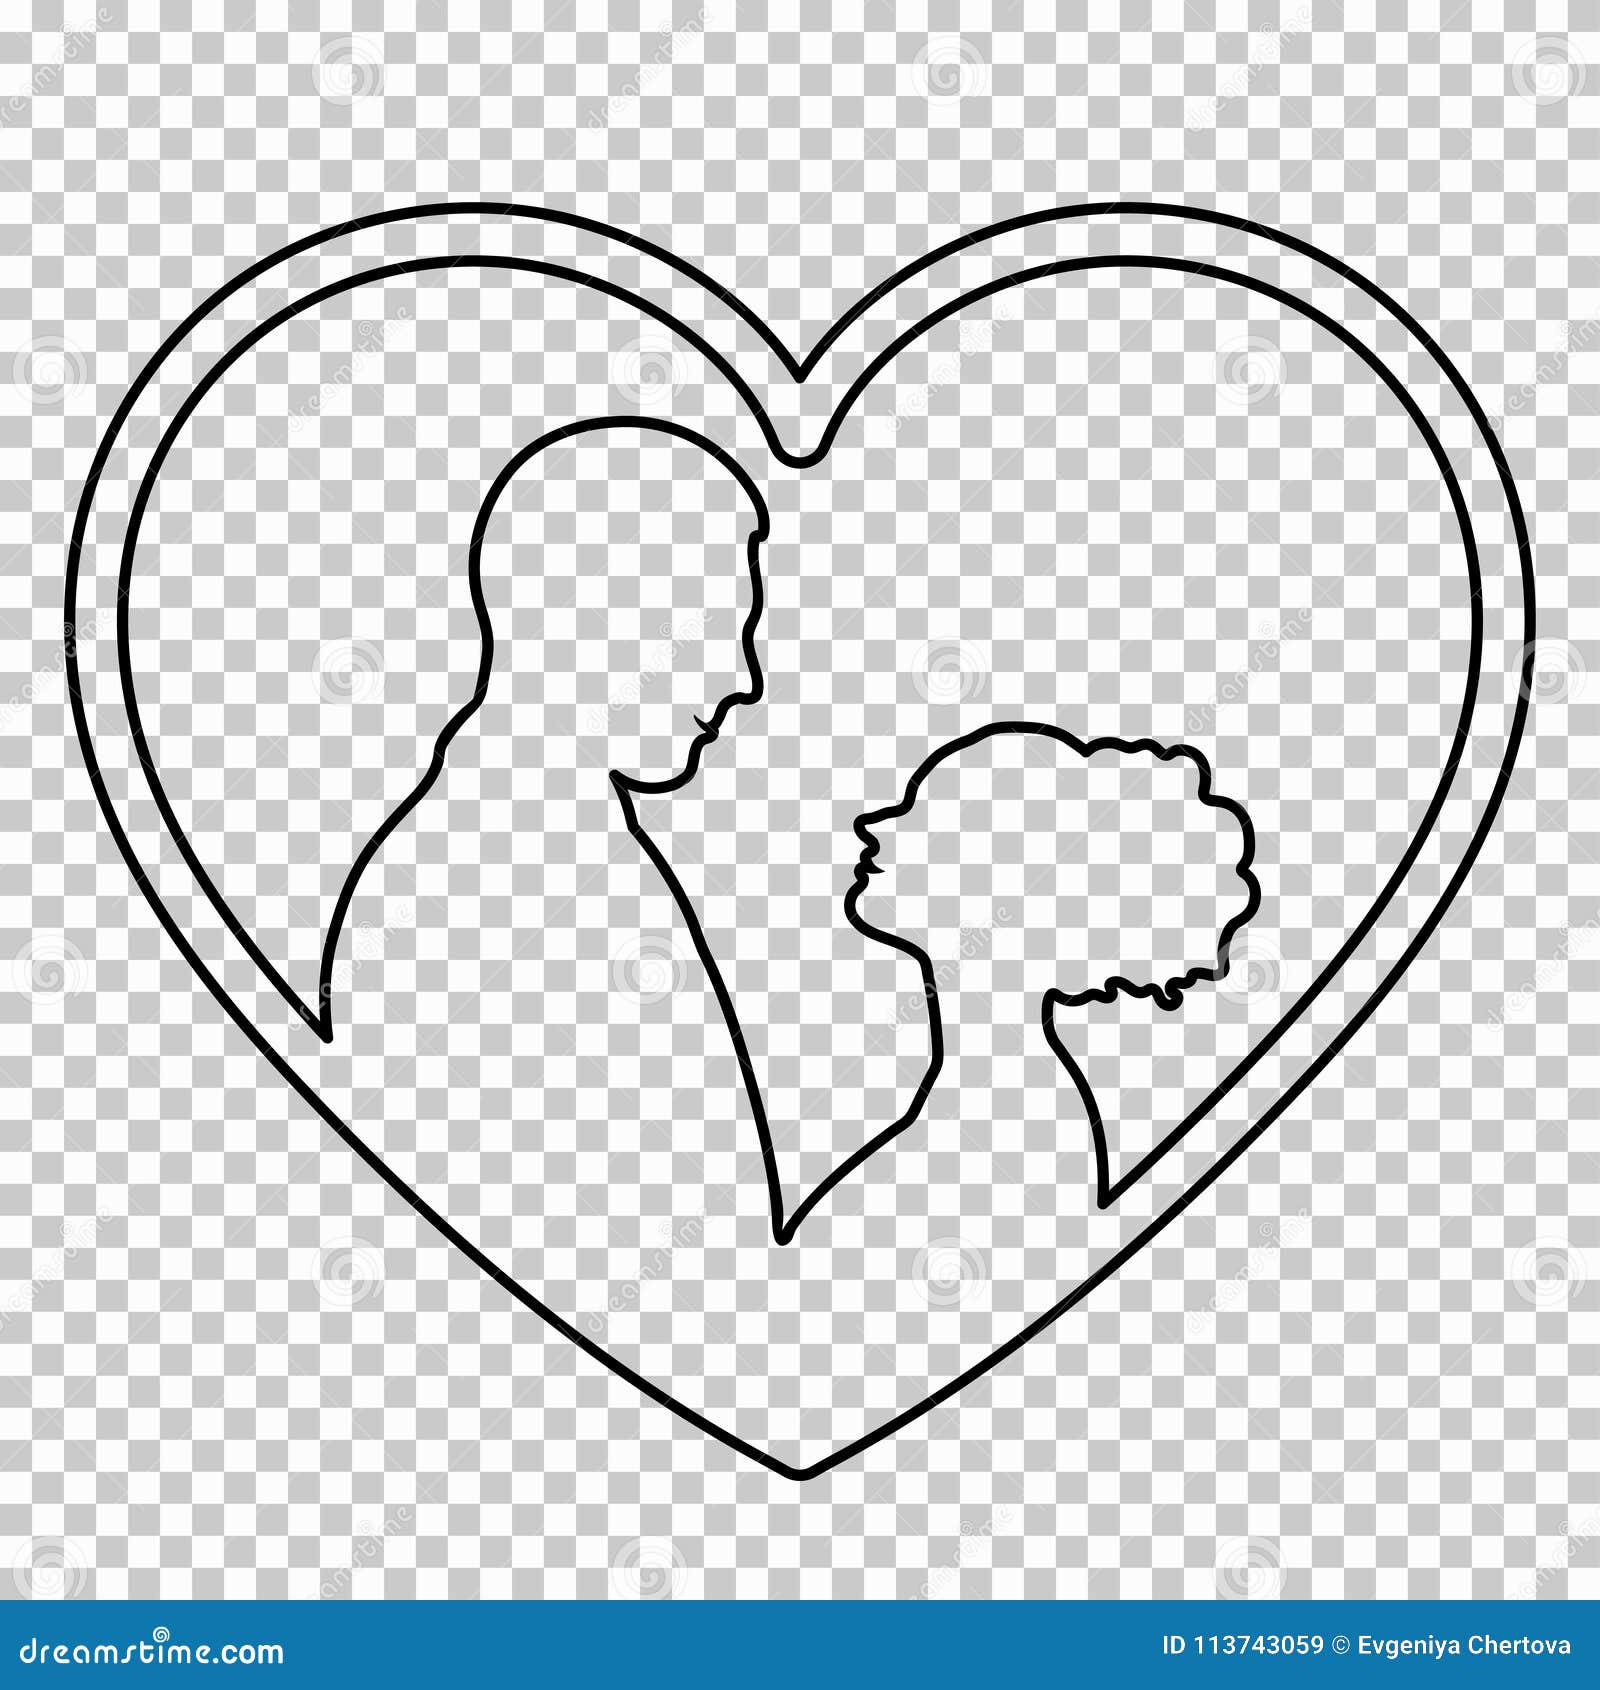 Love Heart Arrow Drawing High-Res Vector Graphic - Getty Images